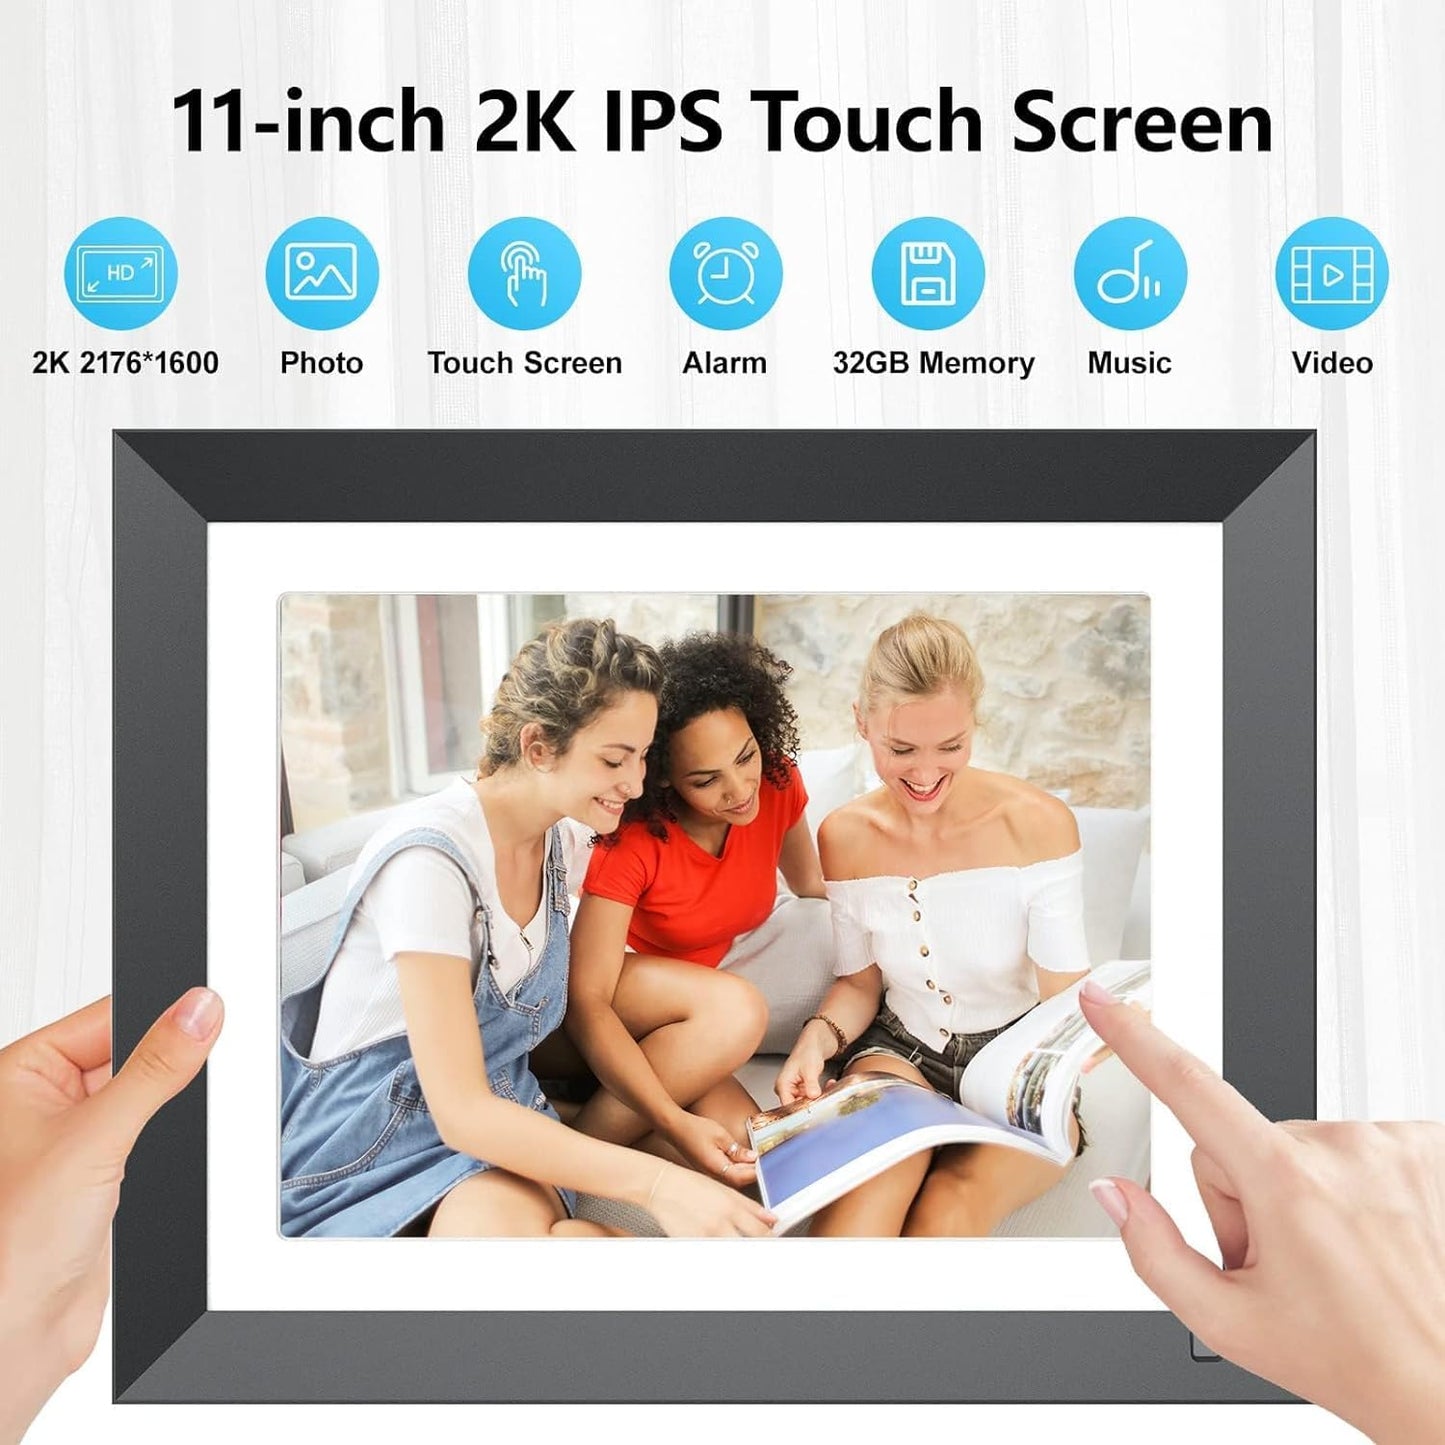 11-inch Smart Digital Photo Frame - FULLJA 32GB Dual-WiFi 2K Digital Picture Frame, Motion Sensor, Full Function, Simply Sharing Photos and Videos via App/Email, Unlimited Cloud Storage